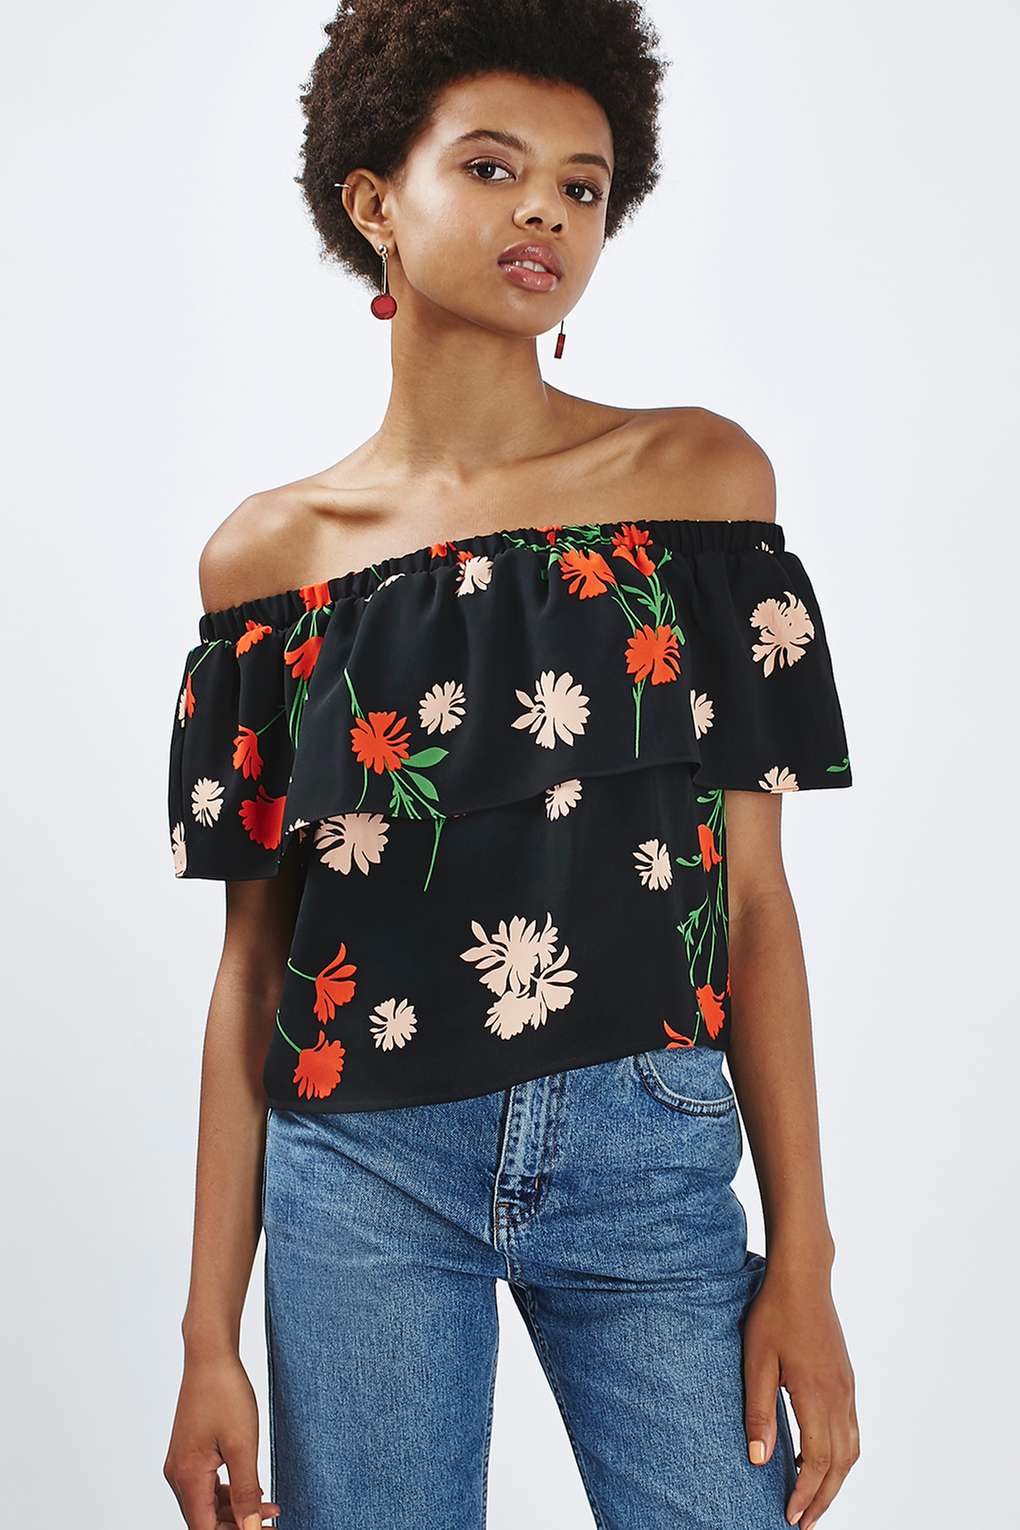 11 off-the-shoulder tops you need to own to complete your summer ...